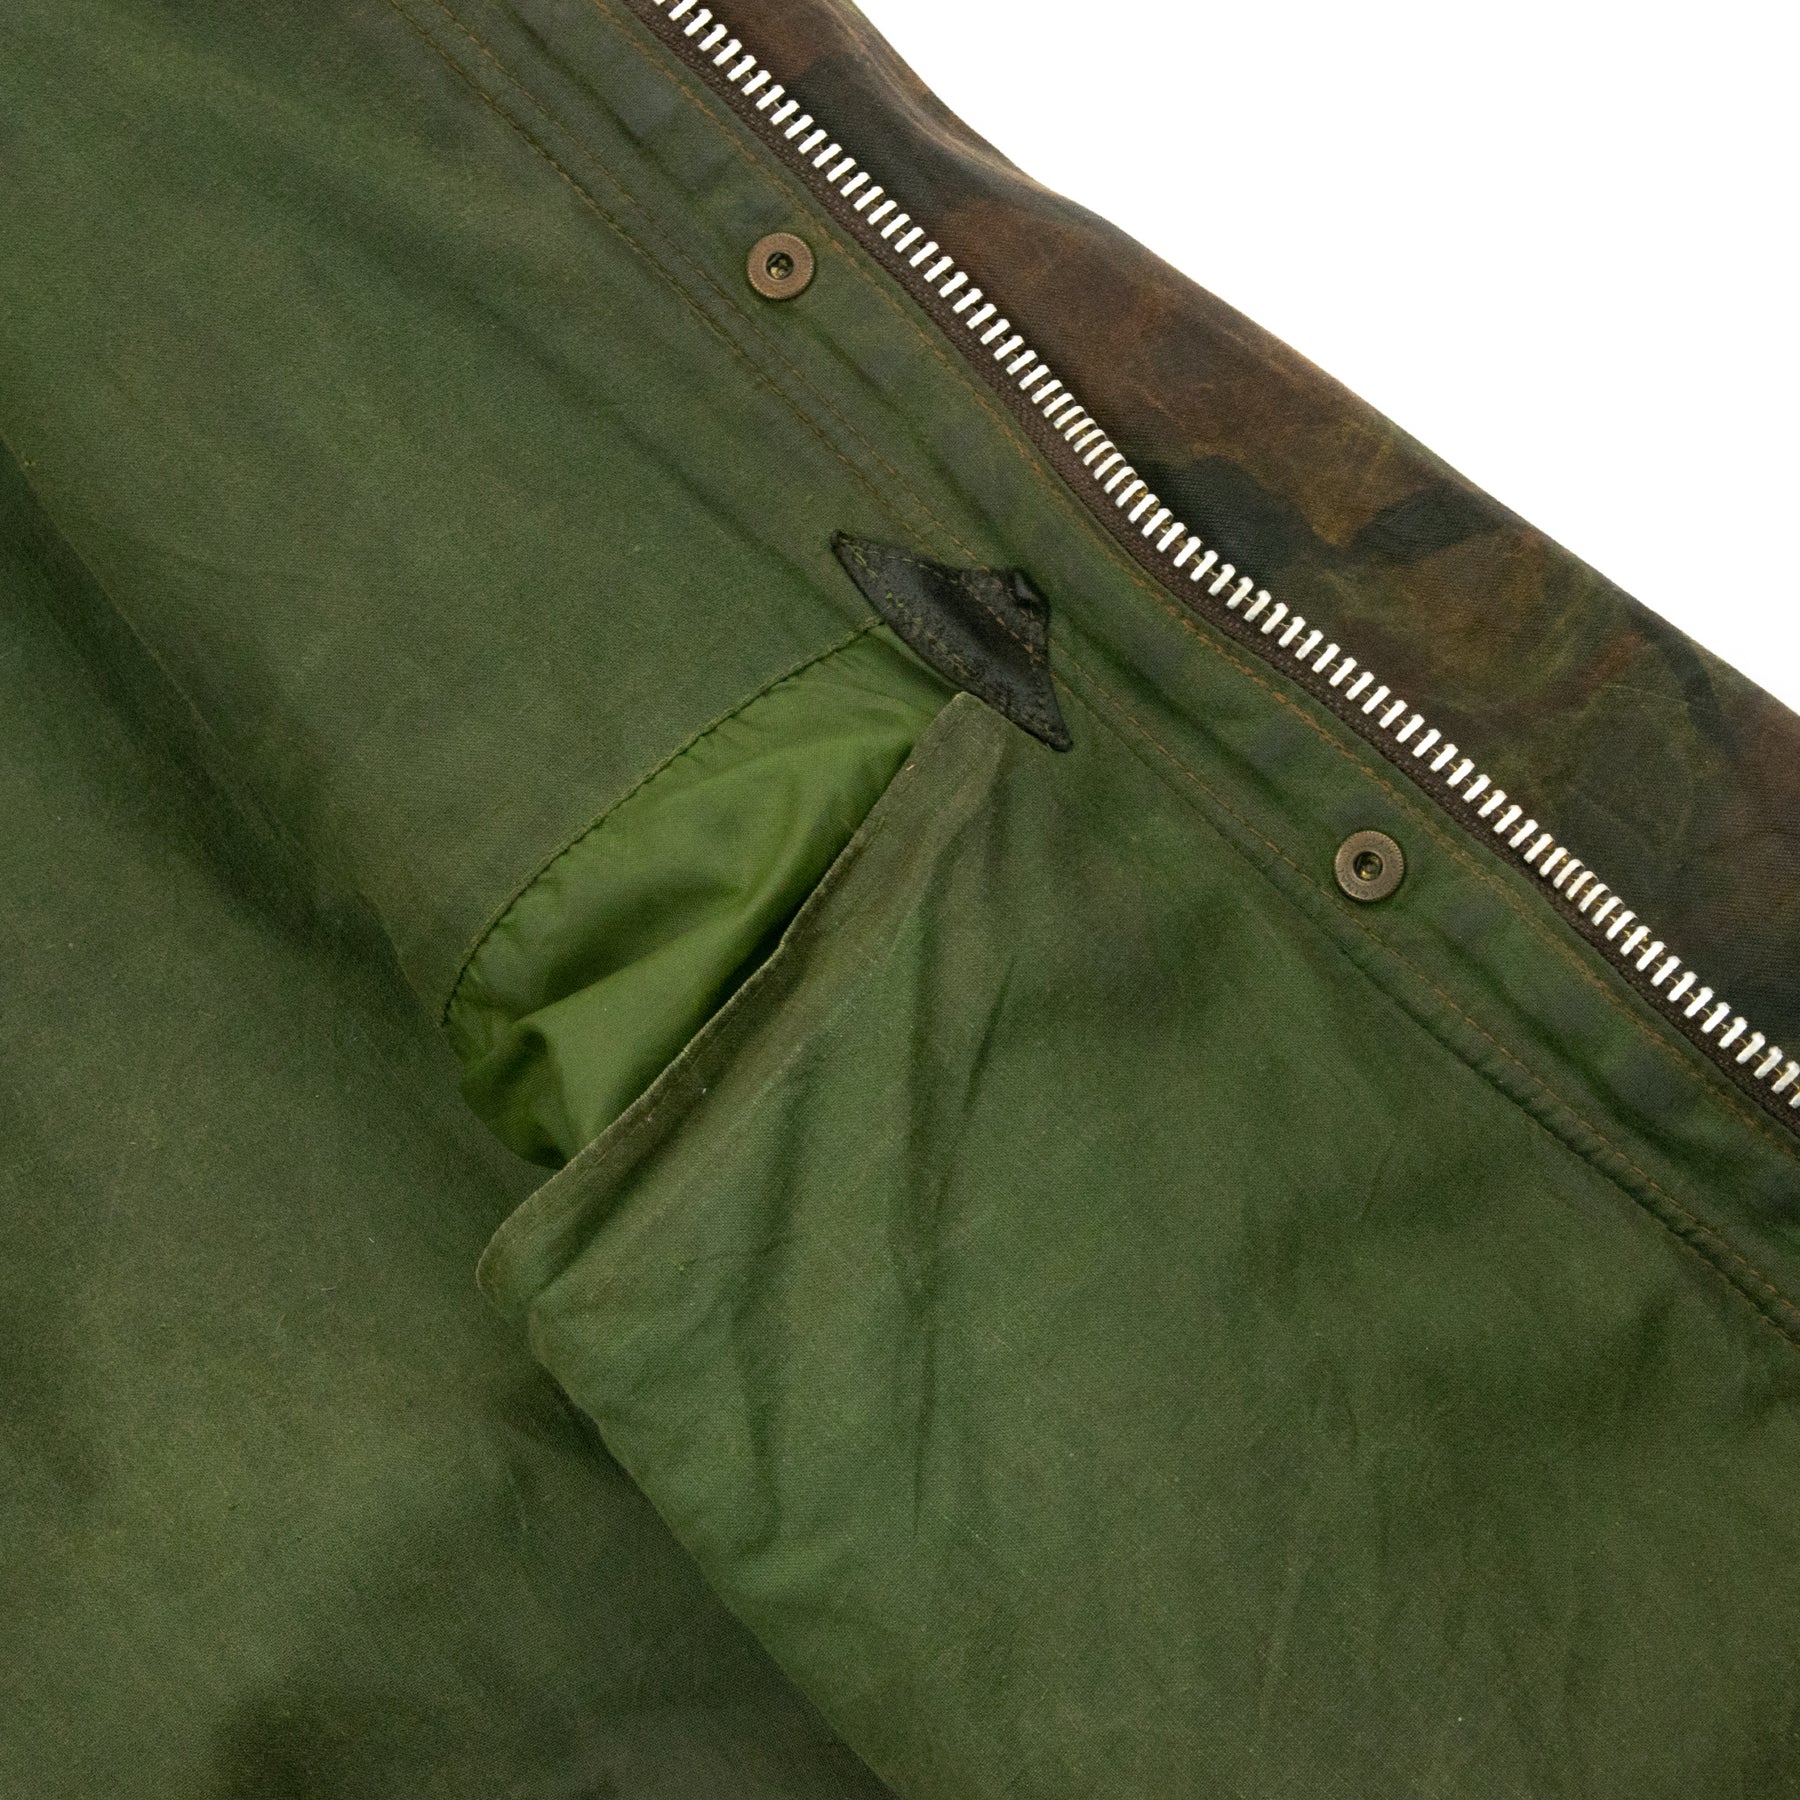 Vintage 1980s Barbour One Crest Waxed Cotton British Military Falkland ...